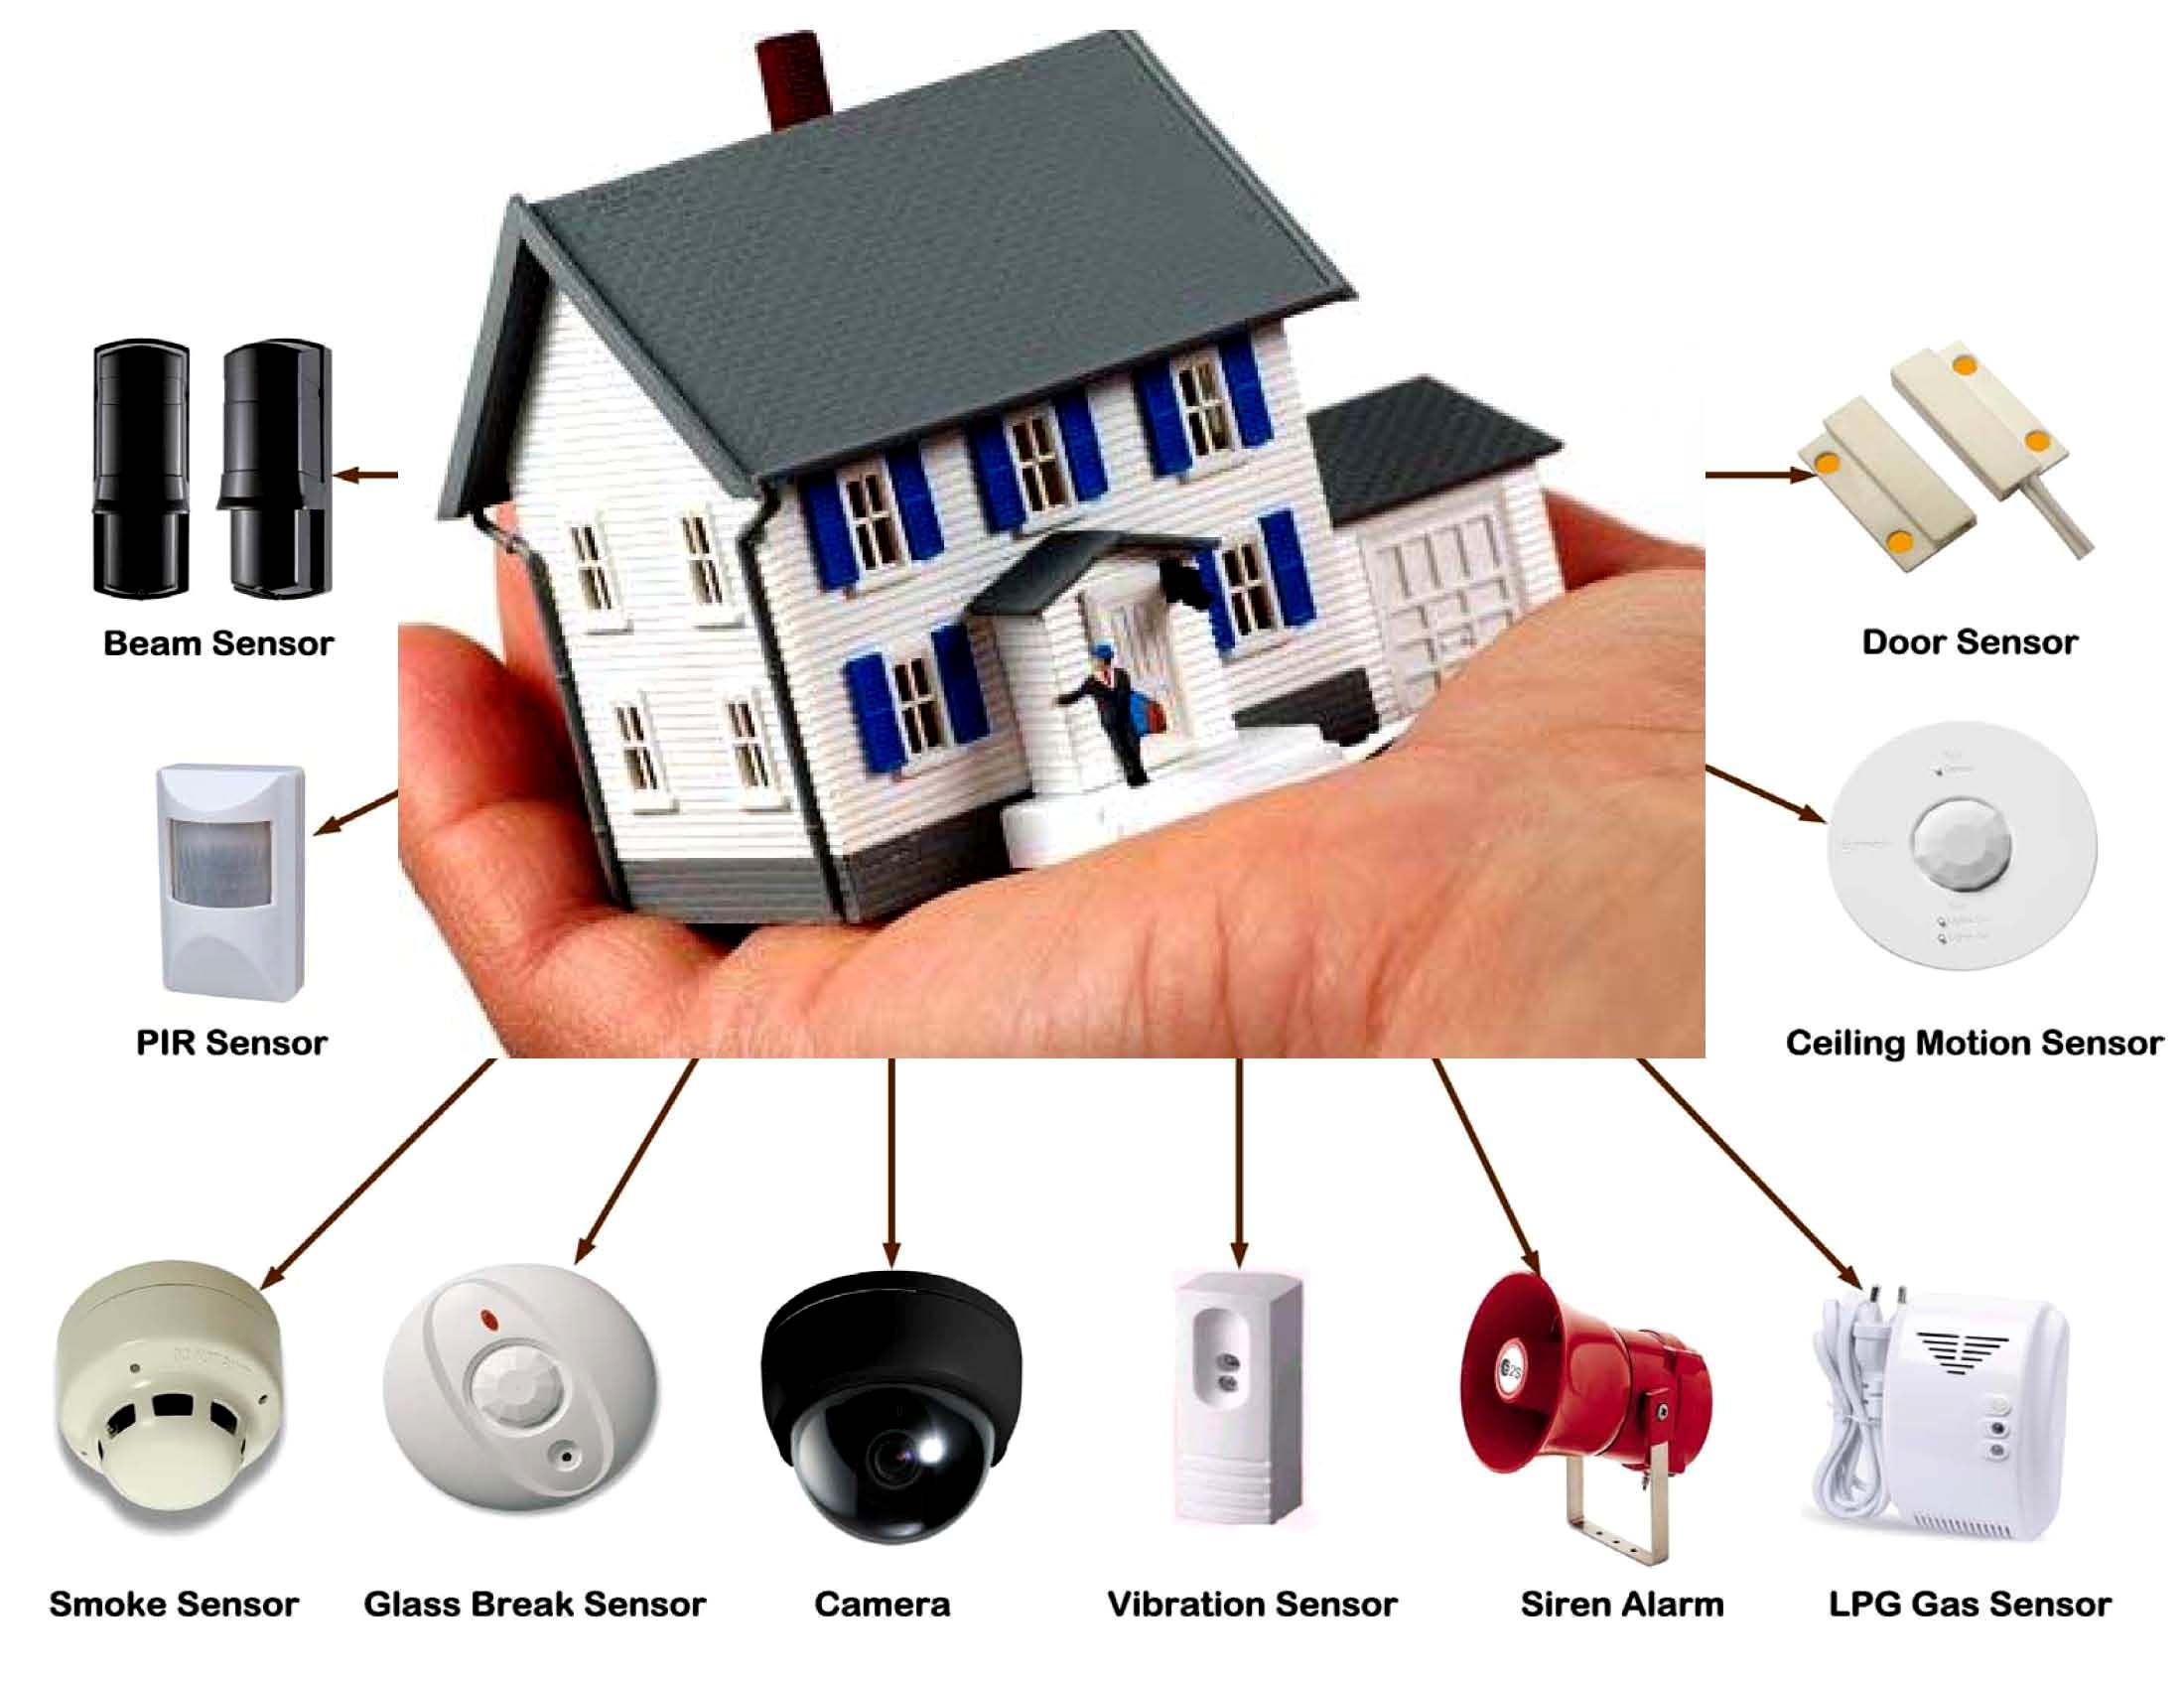 Why you need to install wireless home alarm systems?